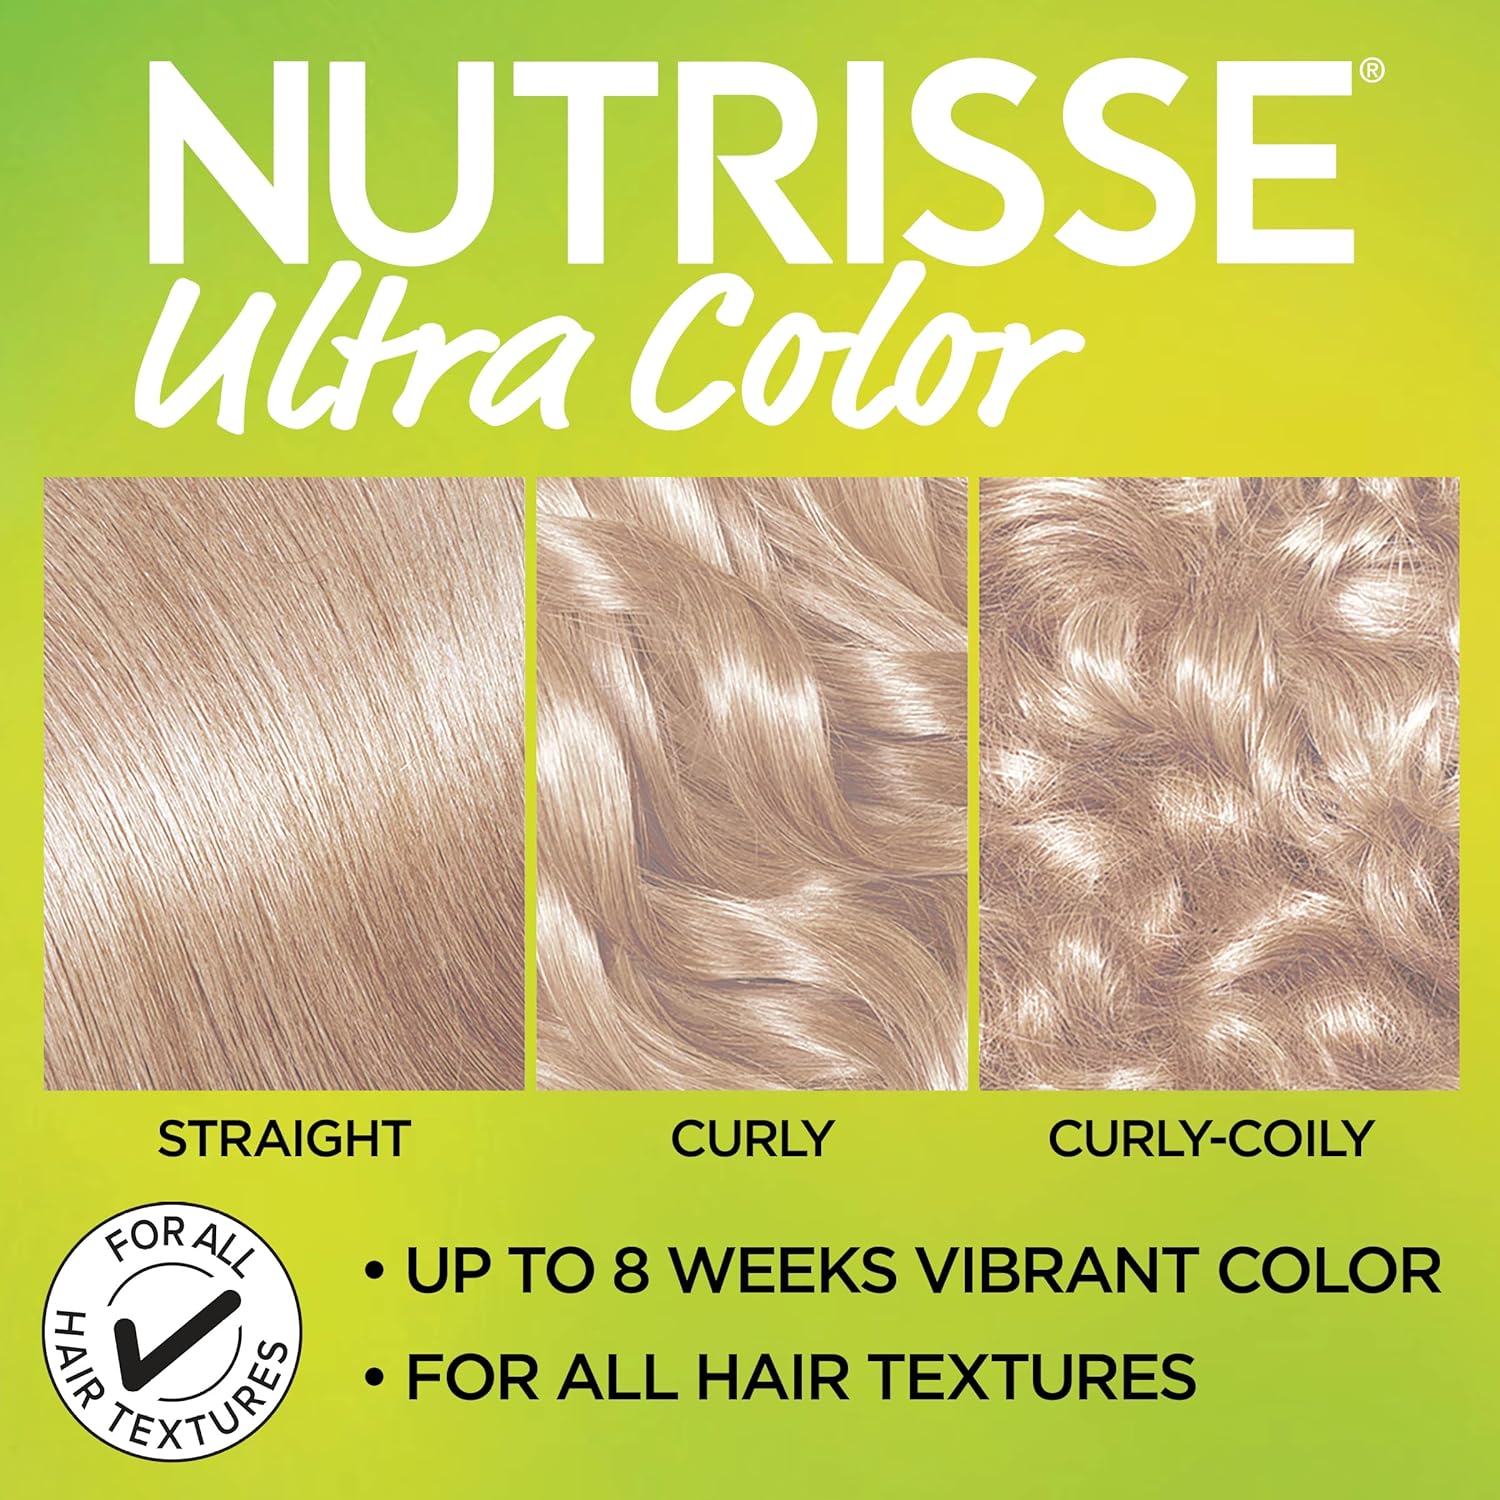 Garnier Hair Color Nutrisse Ultra Color Nourishing Creme, PL2 Ultra Light Platinum (Mascarpone Crème) Permanent Hair Dye, 1 Count (Packaging May Vary) : Beauty & Personal Care